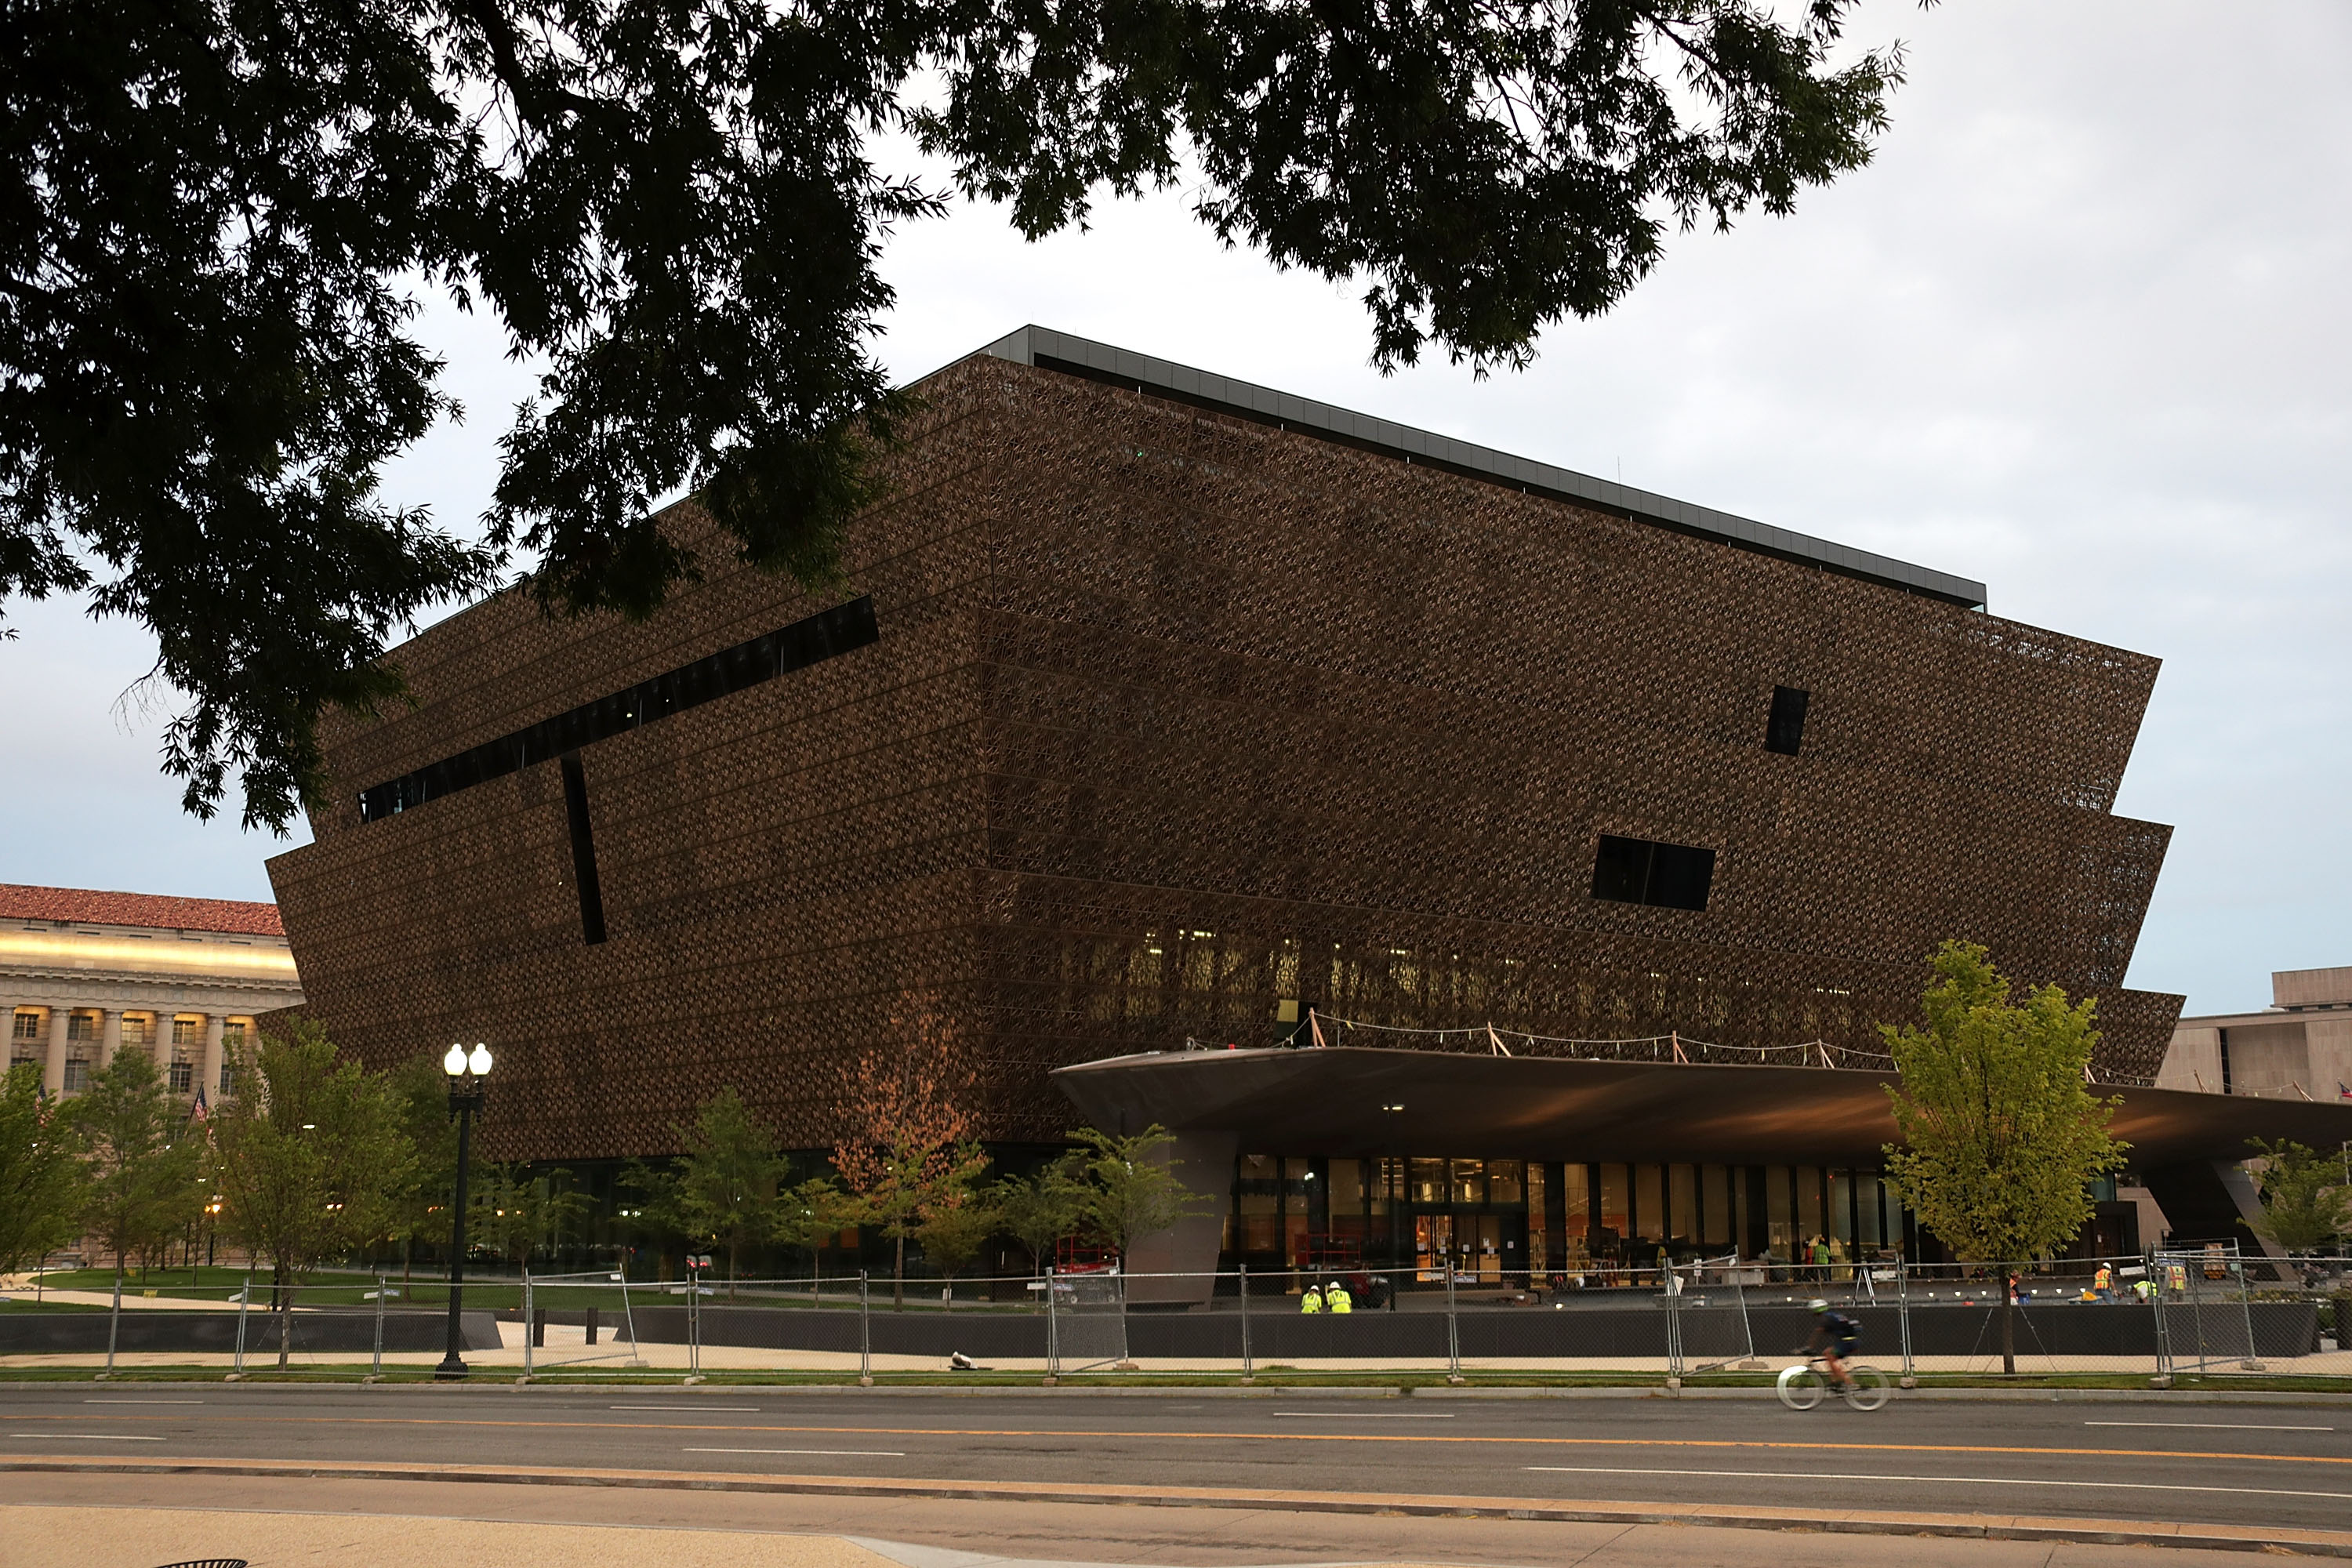 The soon-to-be-opened Smithsonian National Museum of African American History and Culture is seen September 1, 2016 in Washingotn, DC. Alex Wong&mdash;Getty Images (Alex Wong&mdash;Getty Images)